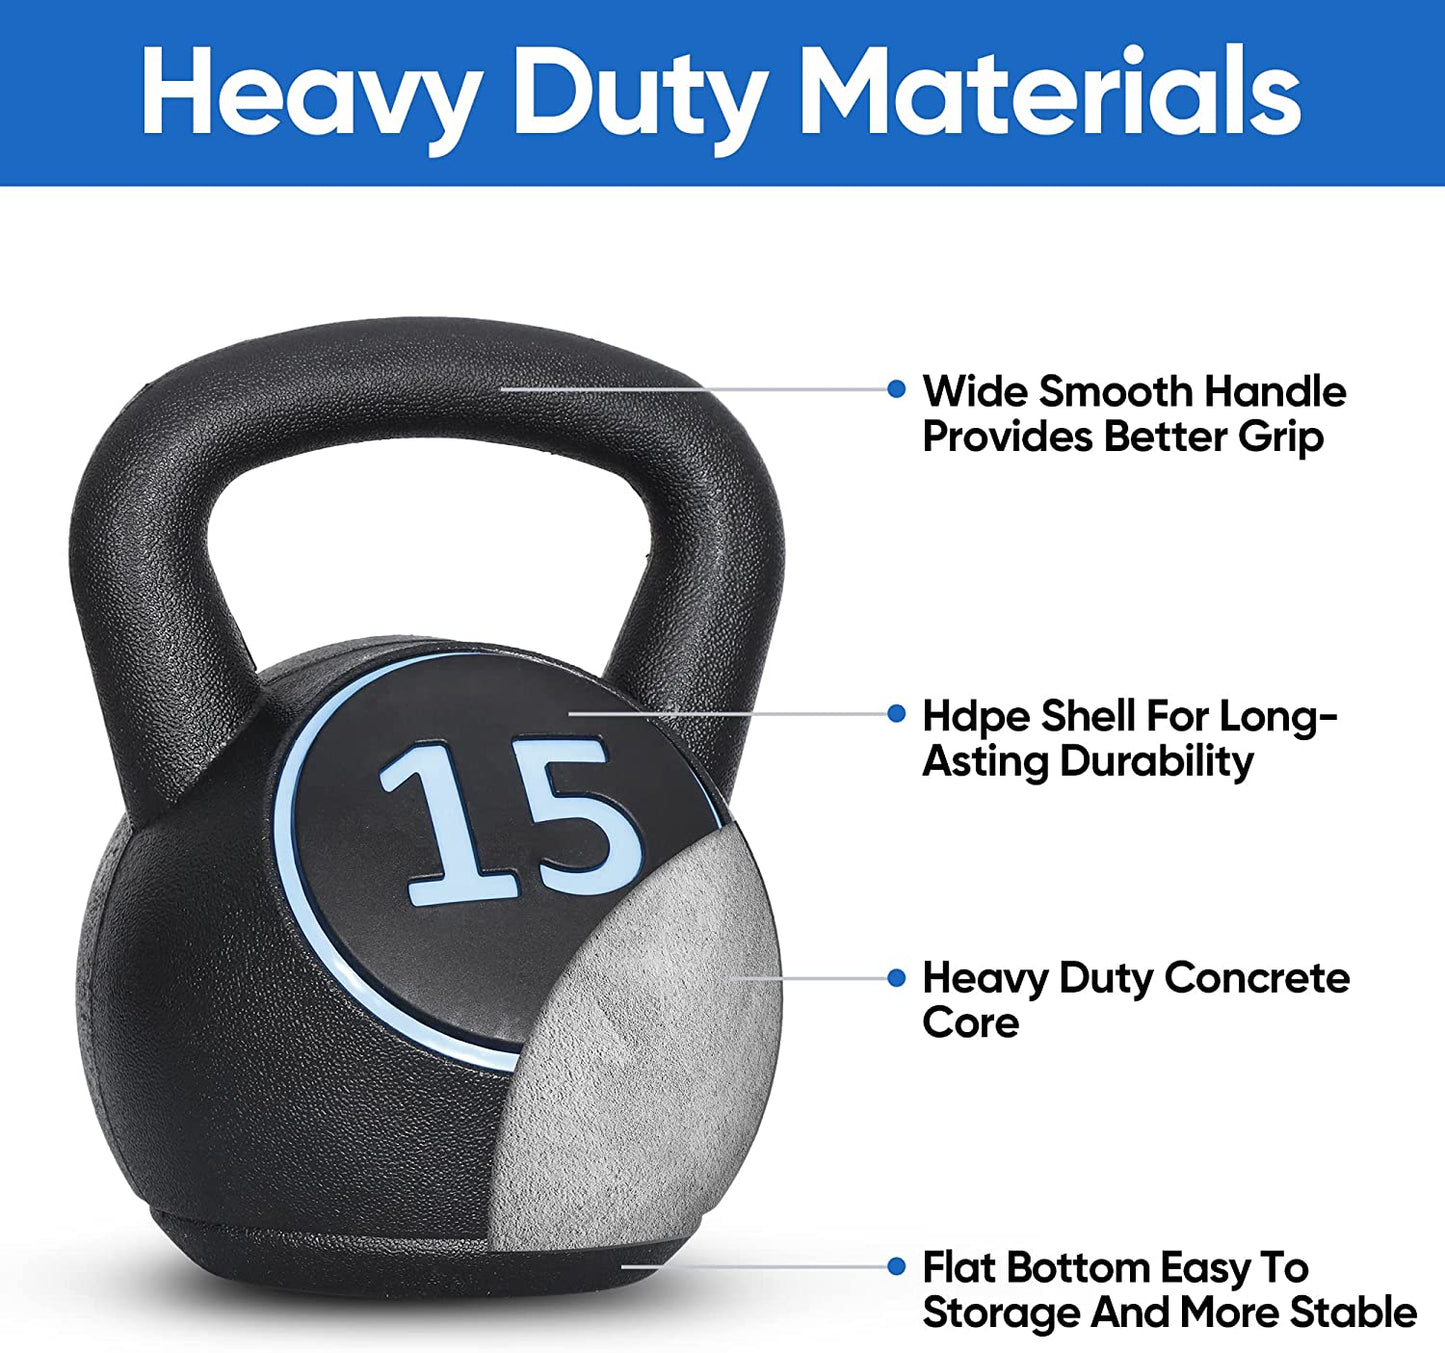 3-Piece Kettlebell Set with Storage Rack Heavy Duty Concrete Kettle Bells 5 lbs 10 lbs 15 lbs for Weightlifting,Strength & Core Training Home Gym